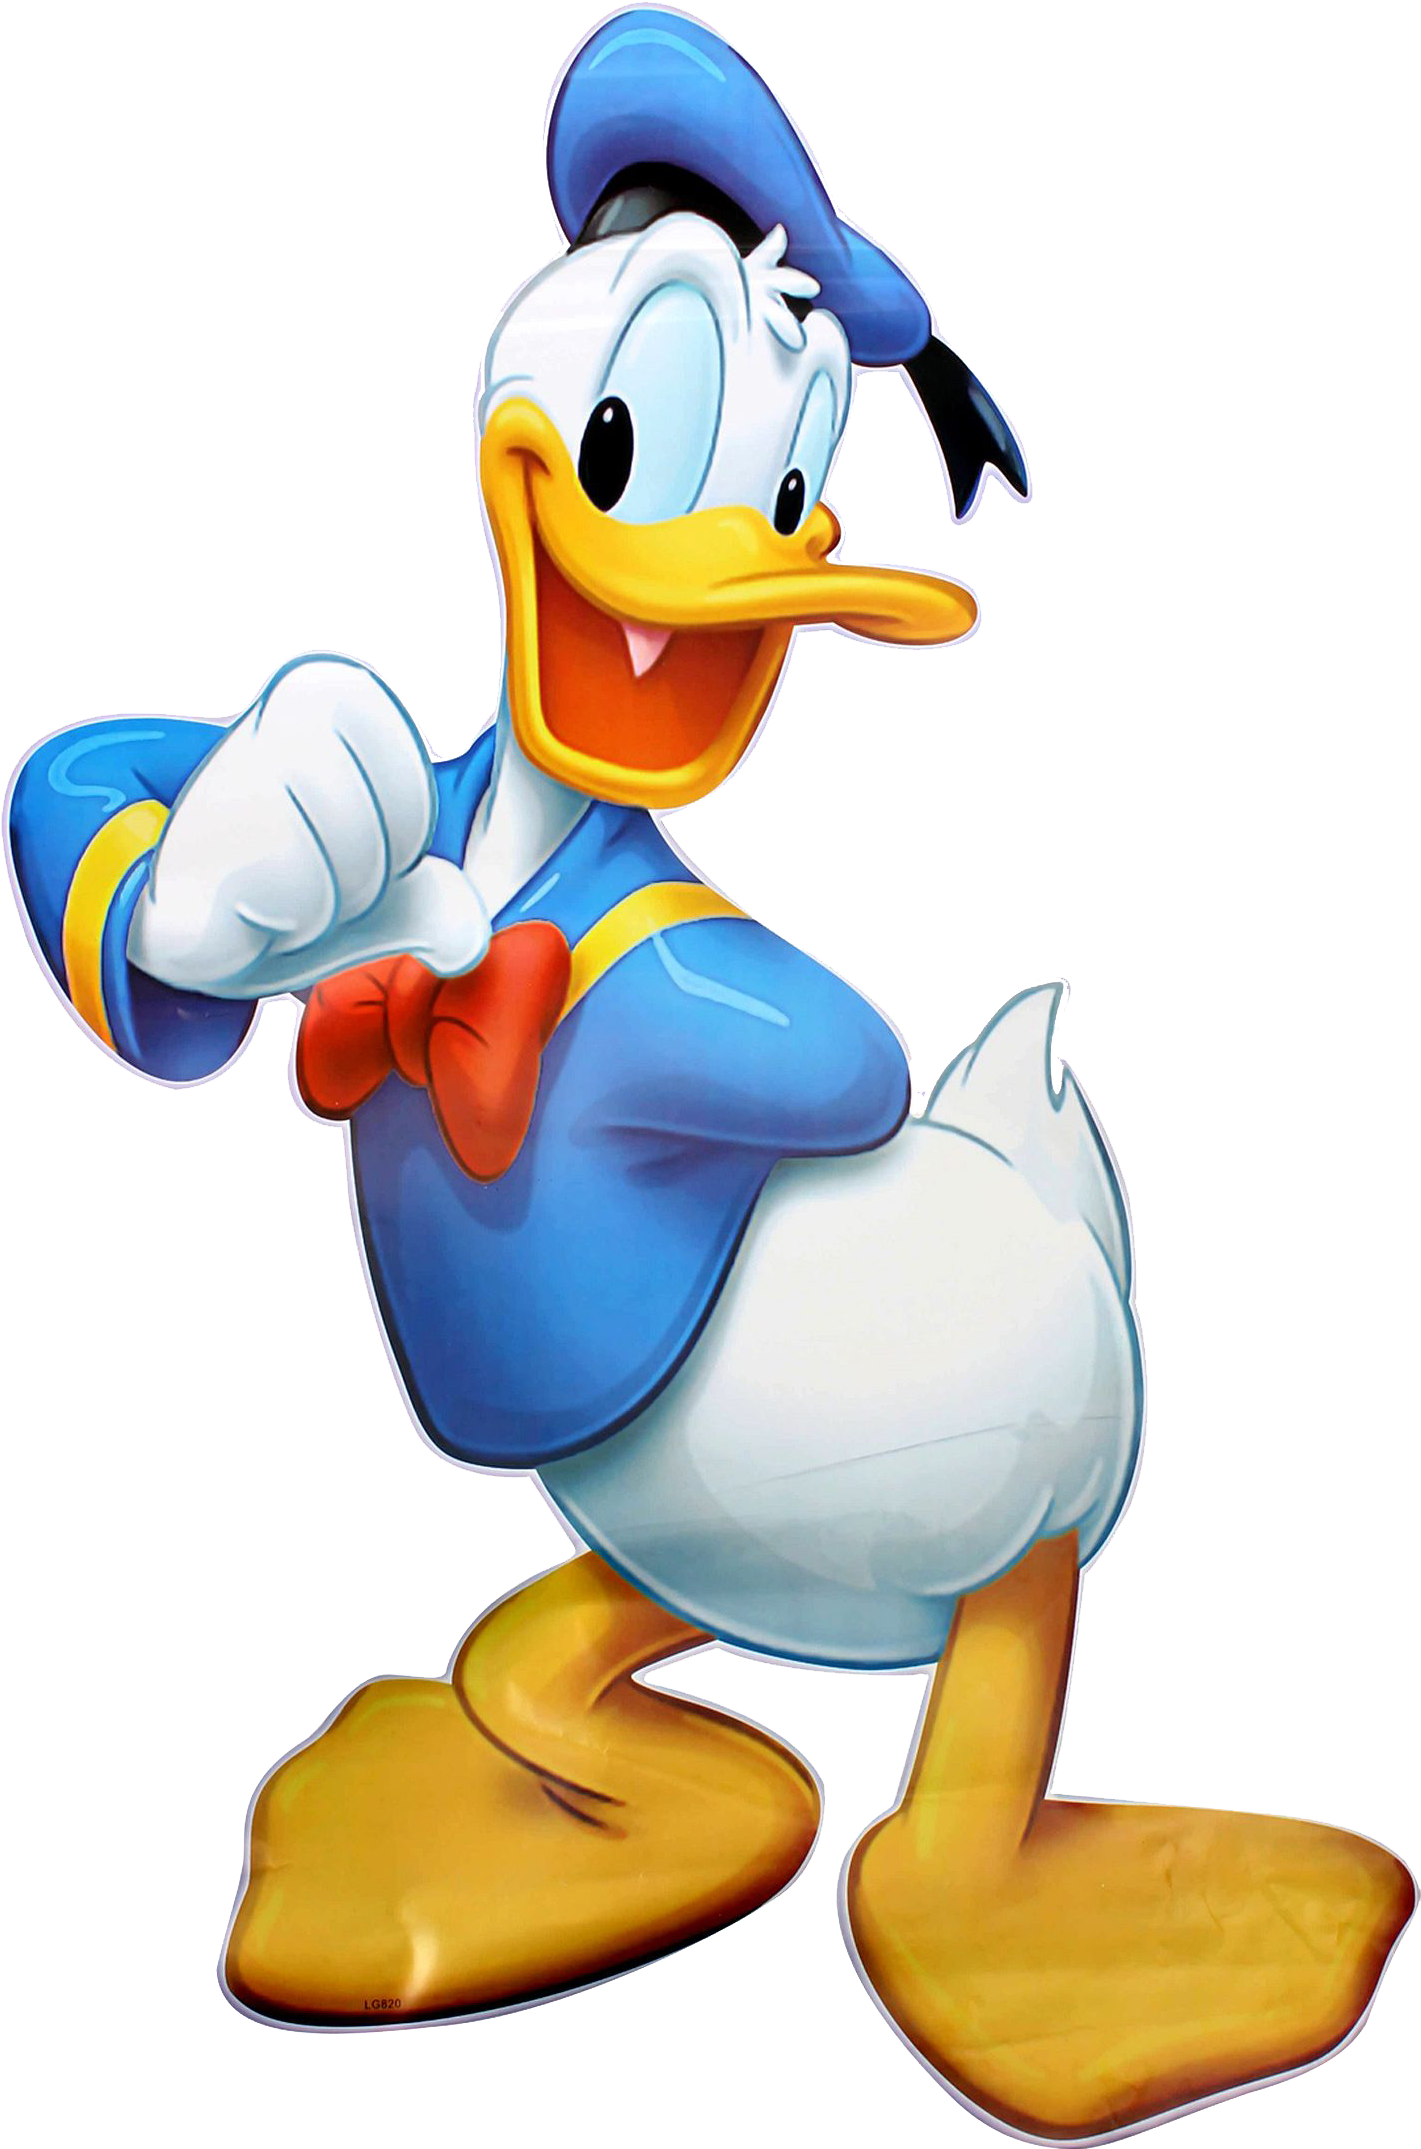 donald trump, video, rubber duck png photo background